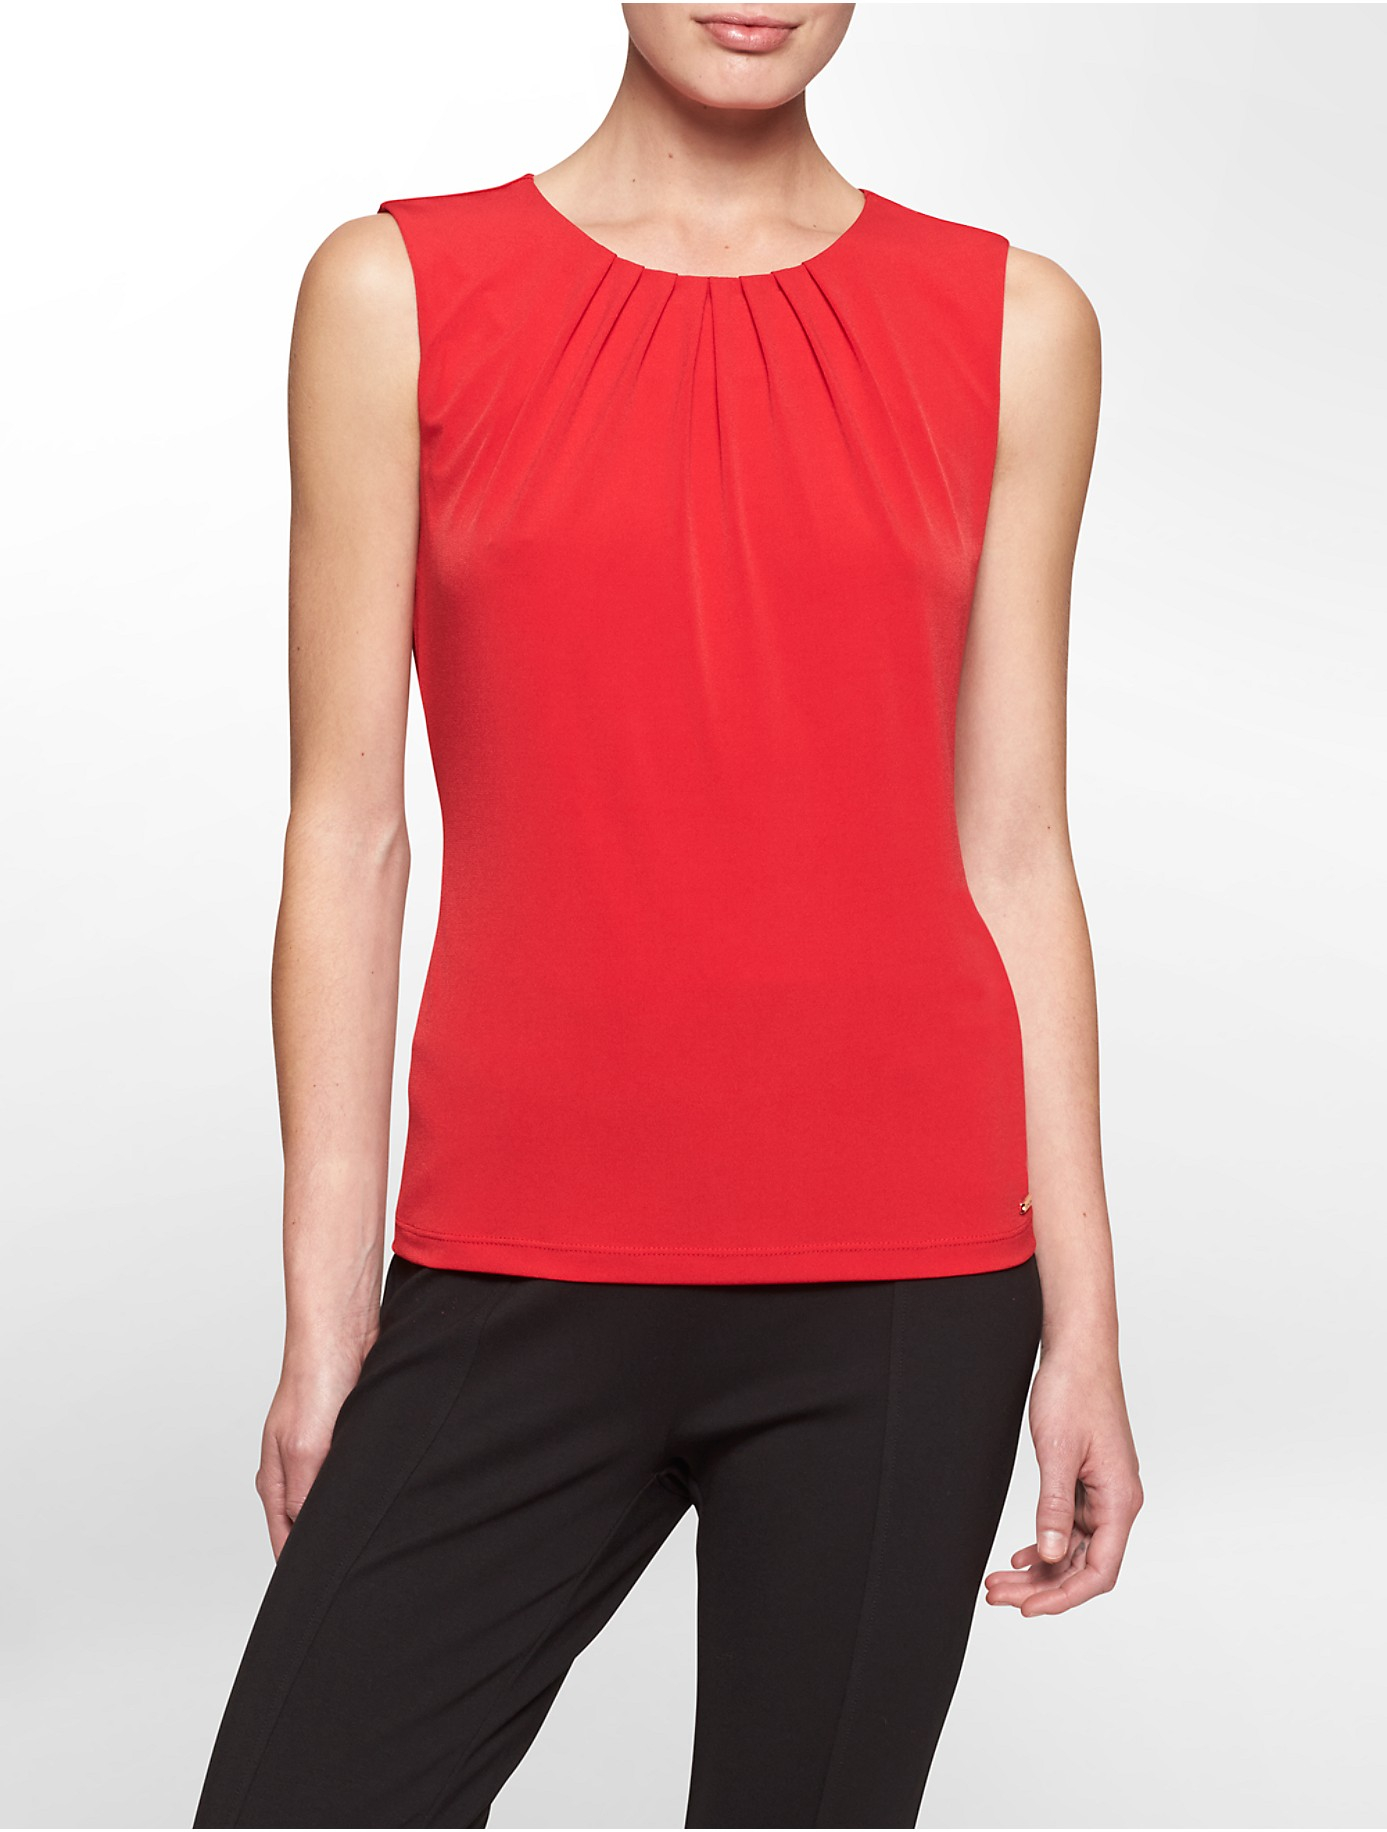 Lyst - Calvin Klein White Label Pleated Scoopneck Sleeveless Top in Red